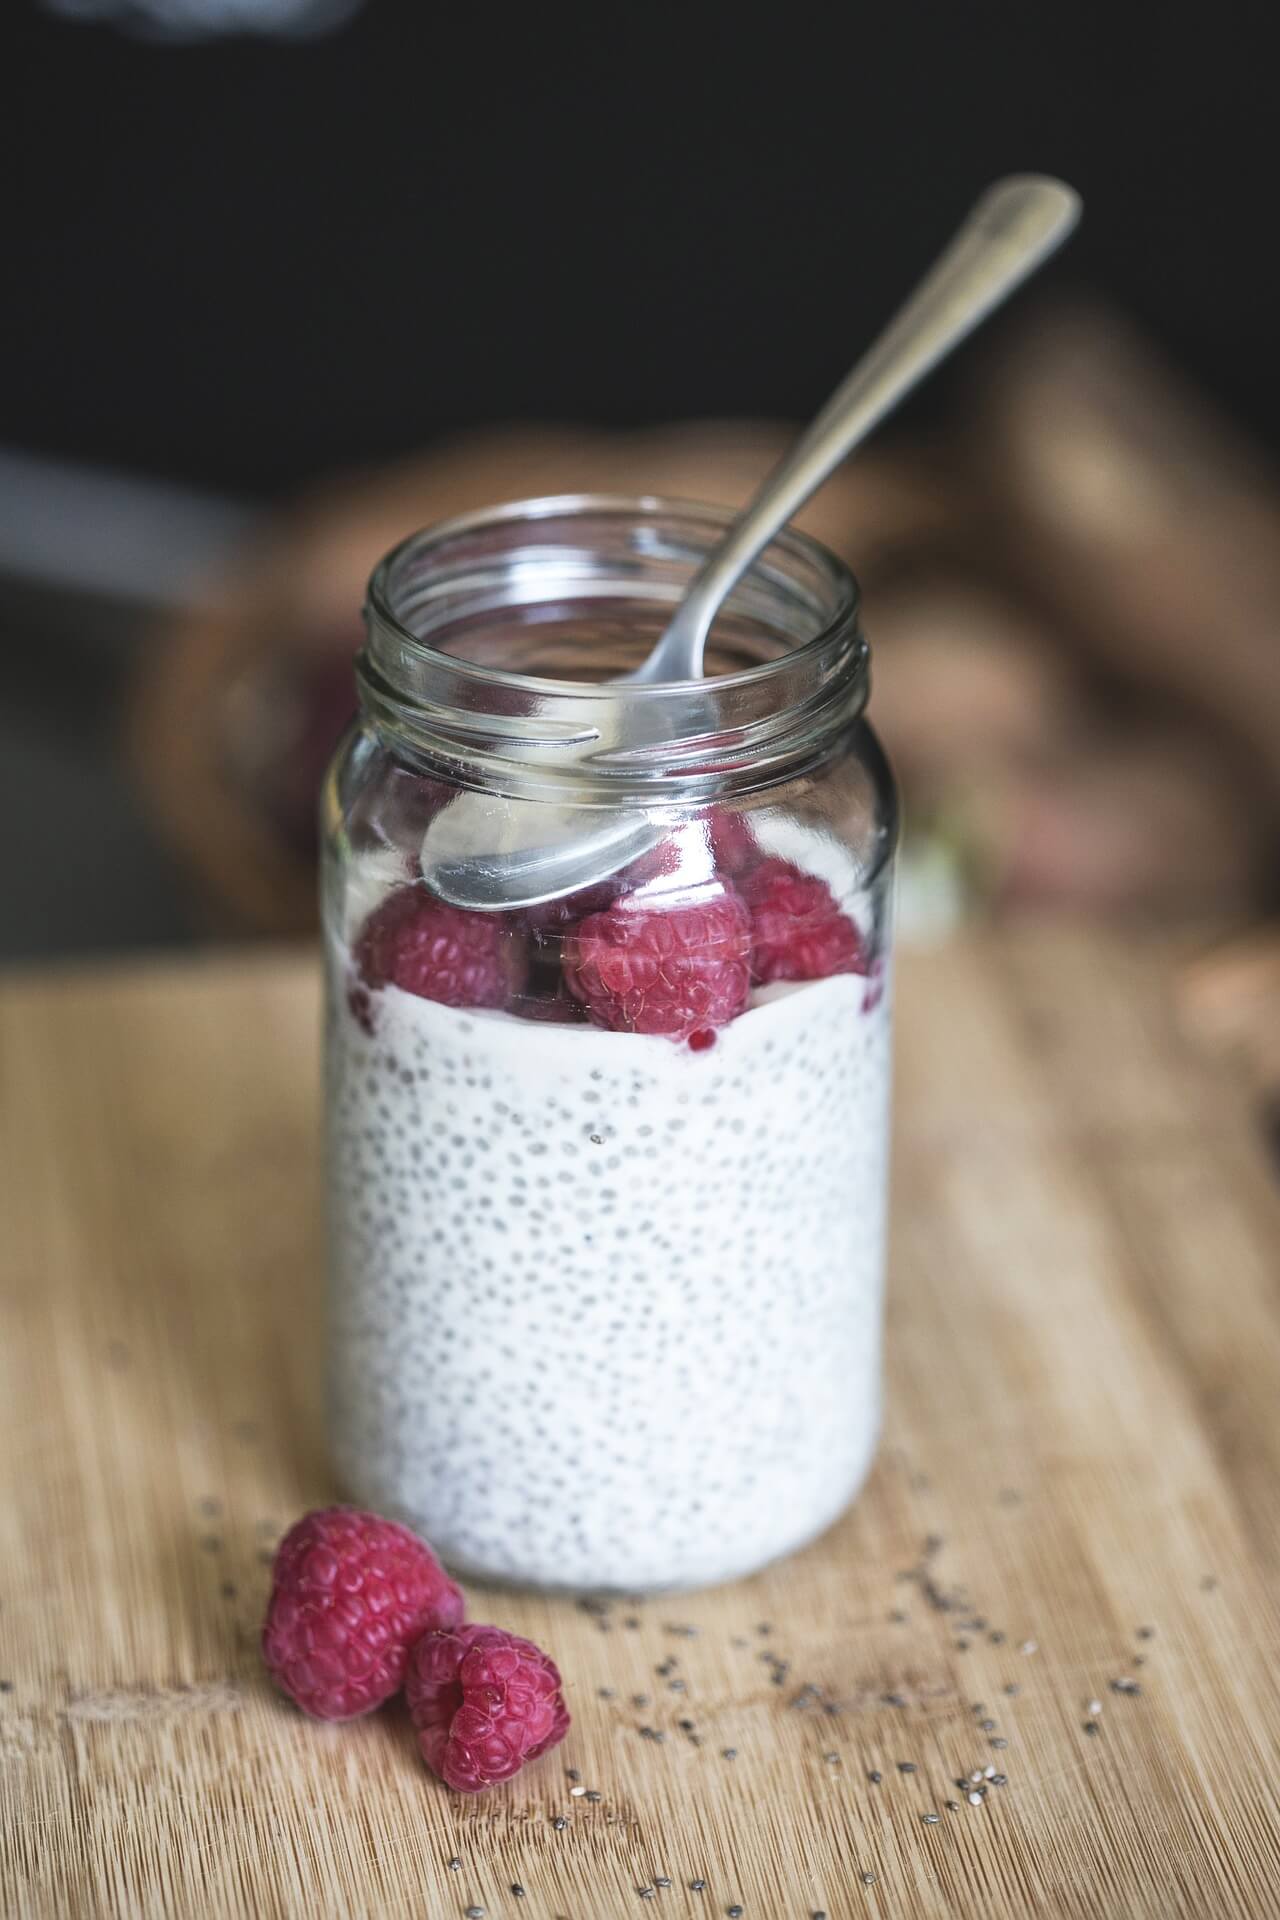 A jar of chia pudding.